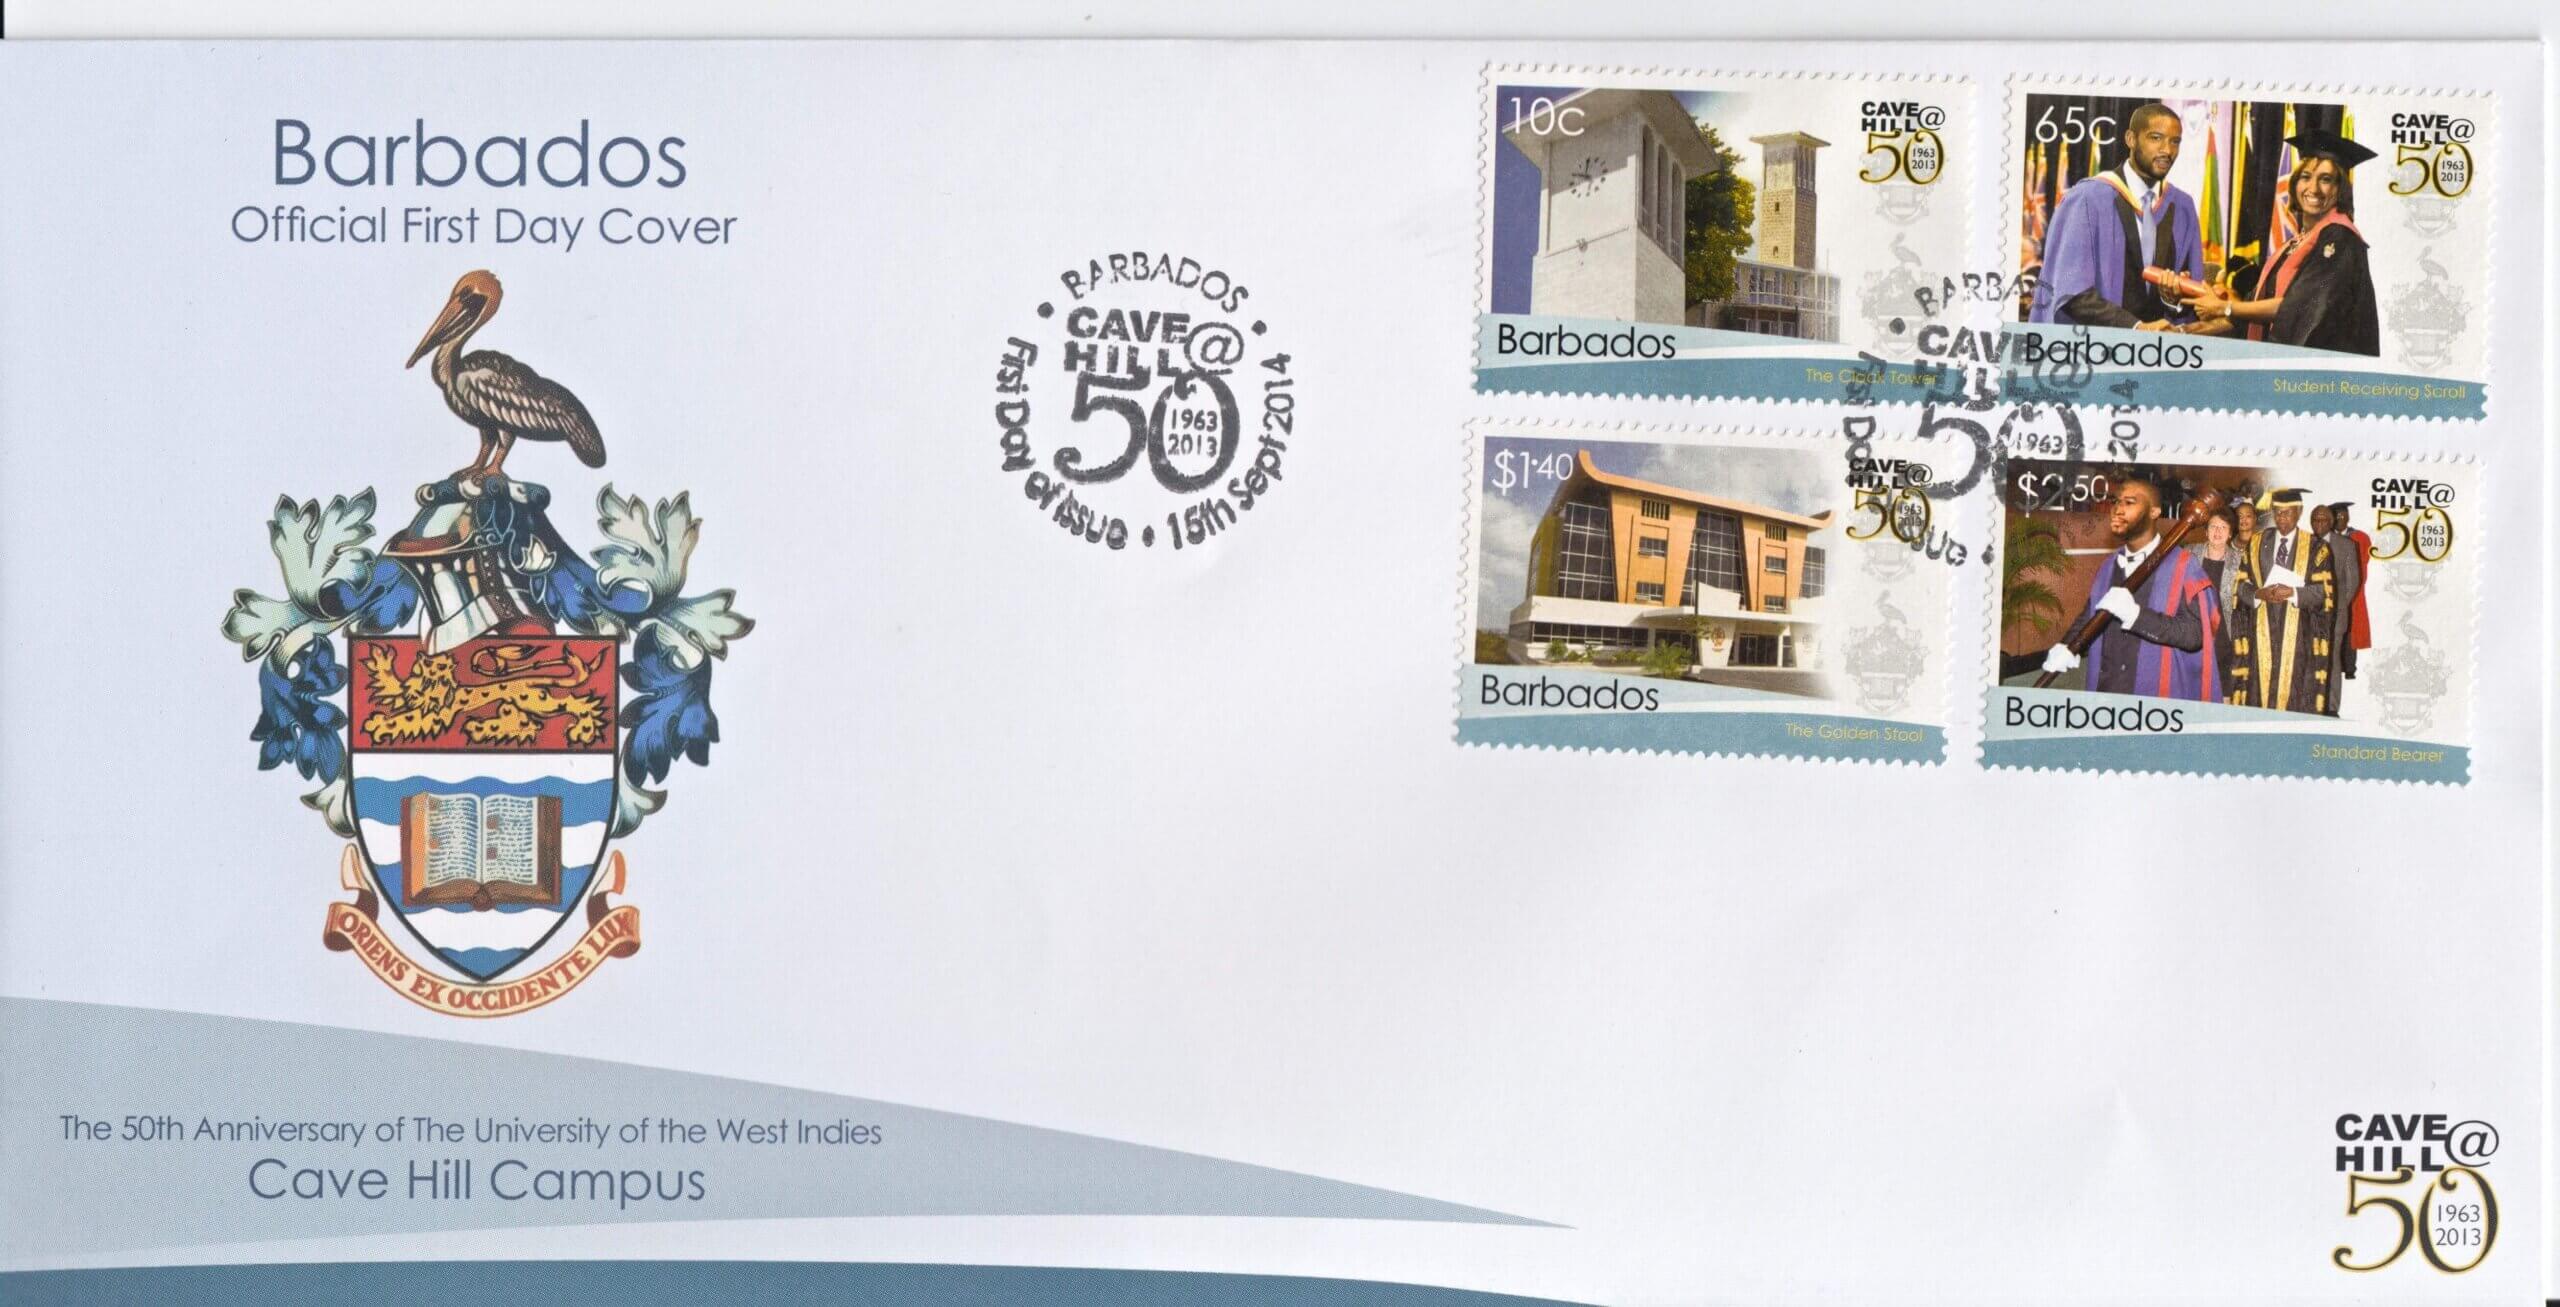 50th Anniversary of the University of the West Indies Cave Hill Campus Barbados - First Day Cover